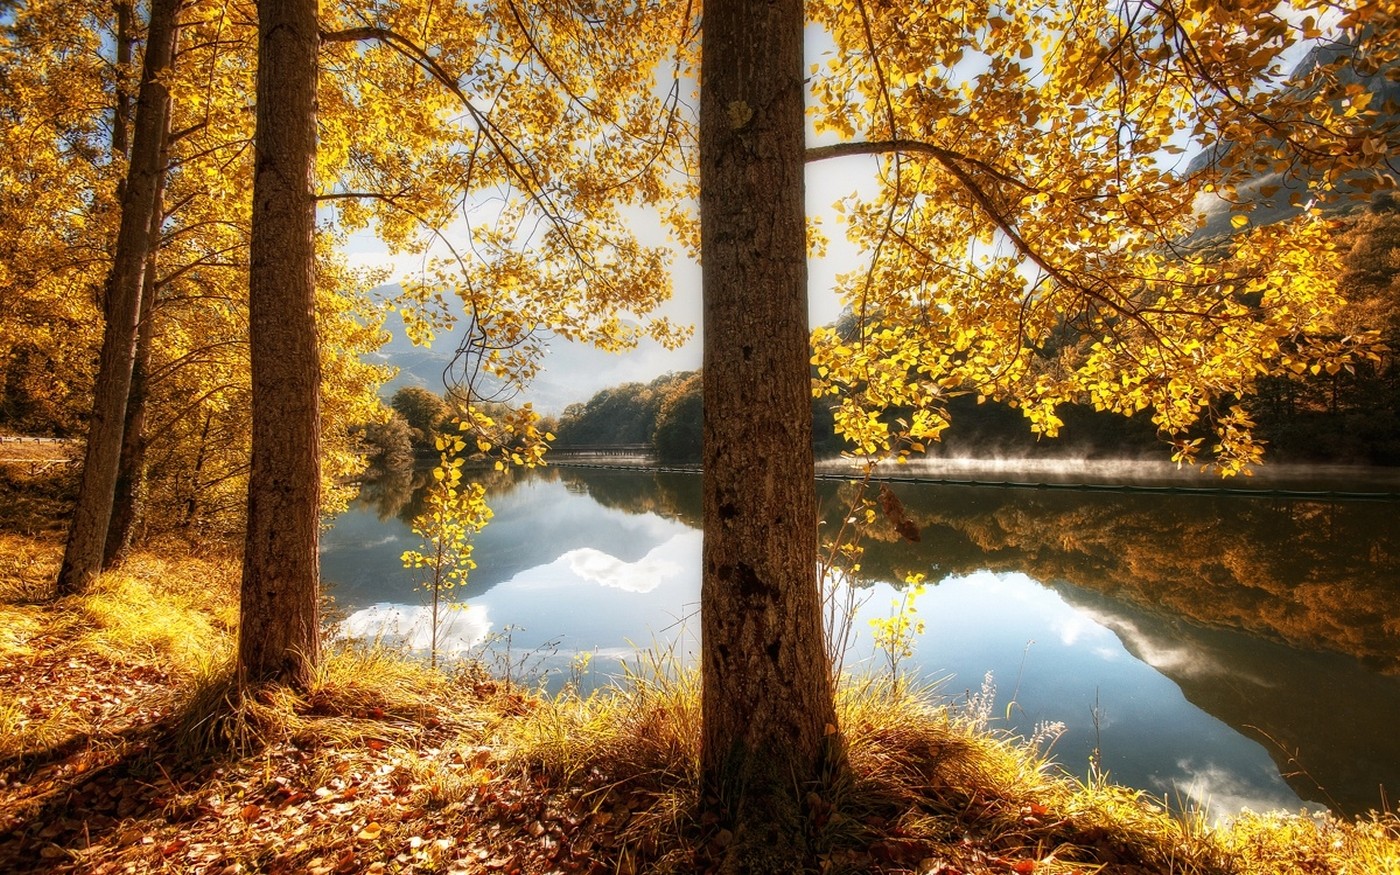 General 1400x875 nature landscape fall river leaves hills trees reflection yellow grass water